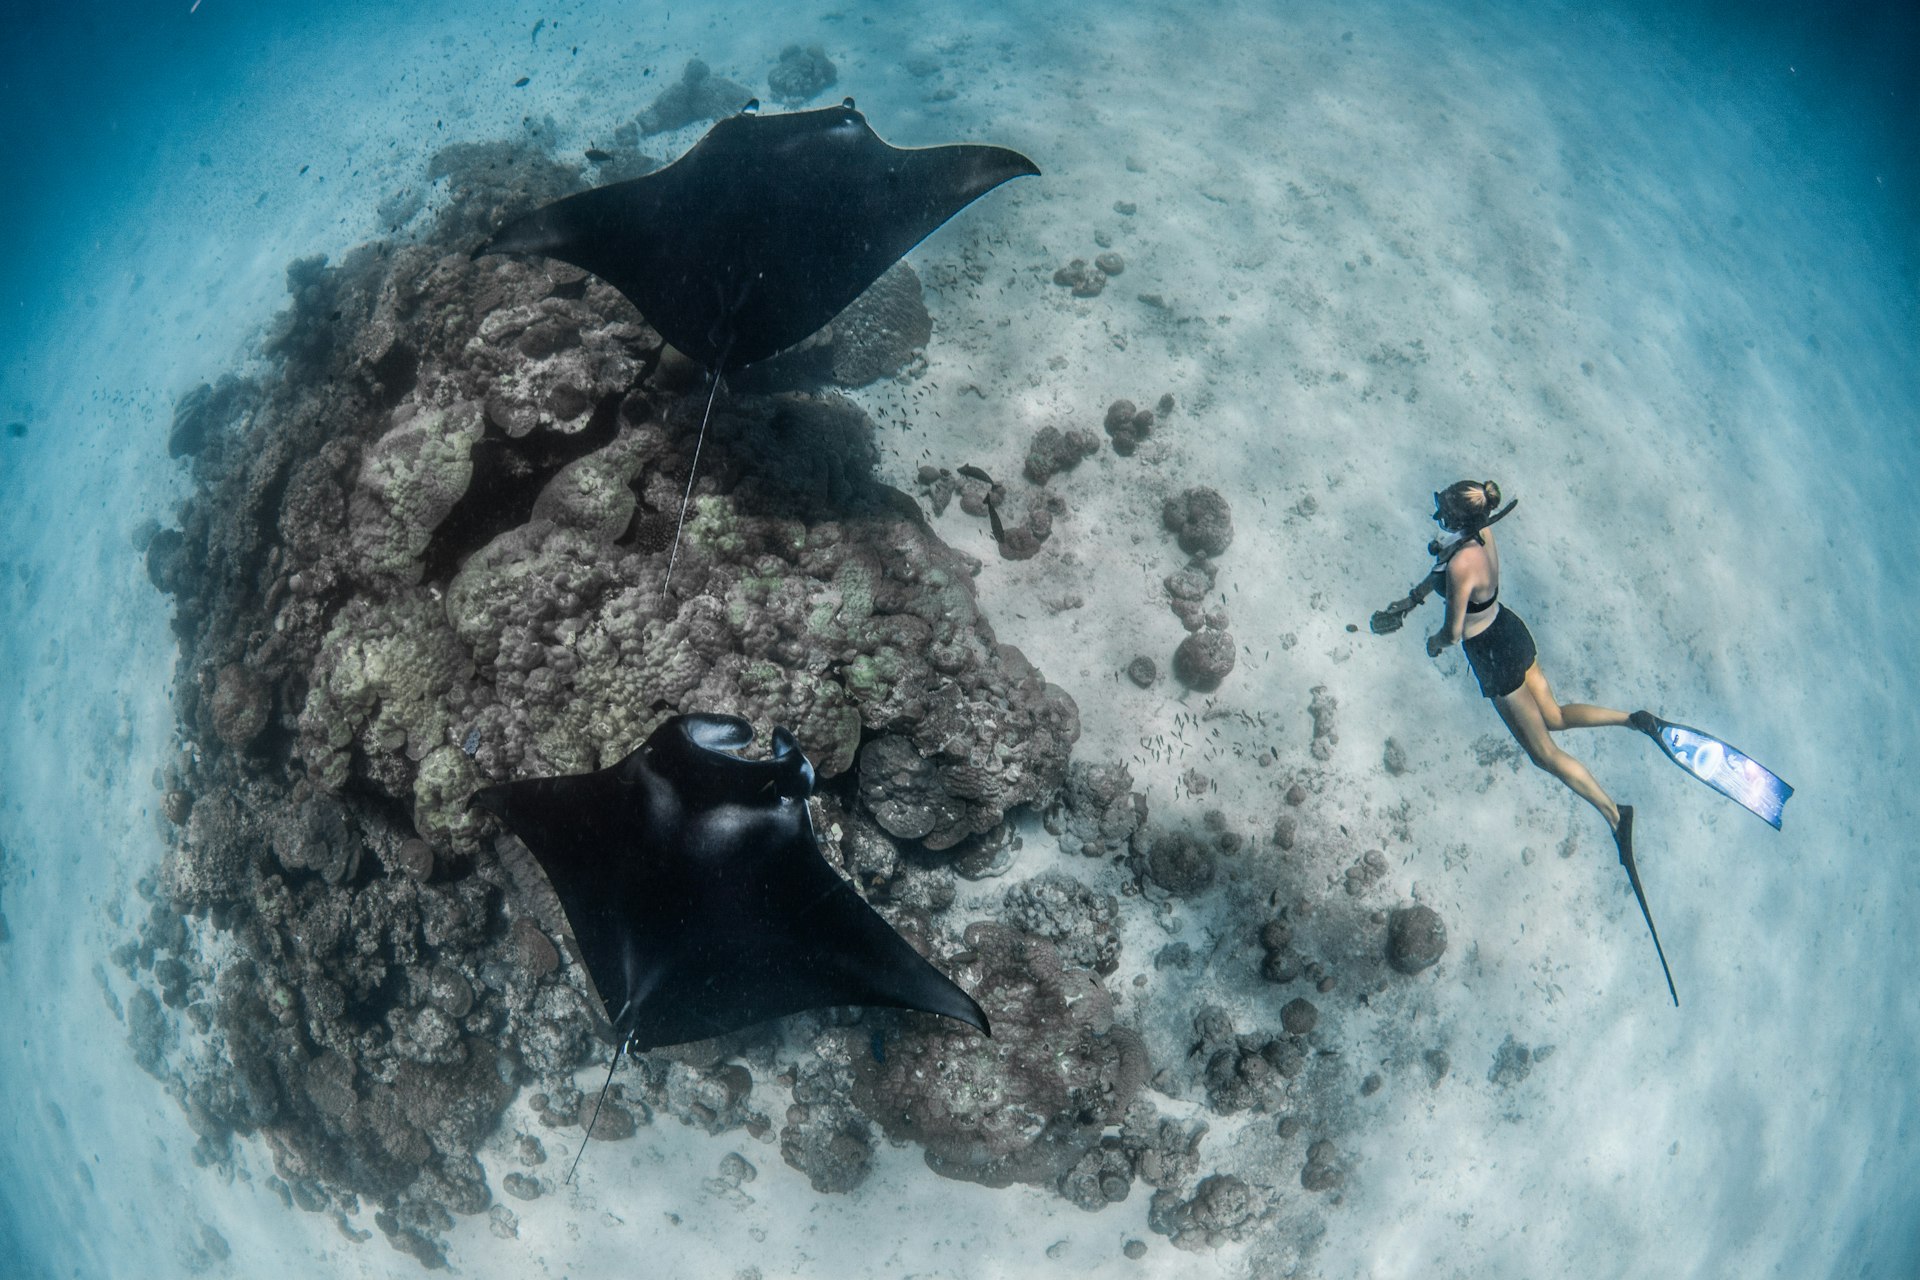 A snorkeler gets close to two huge manta rays in the Maldives